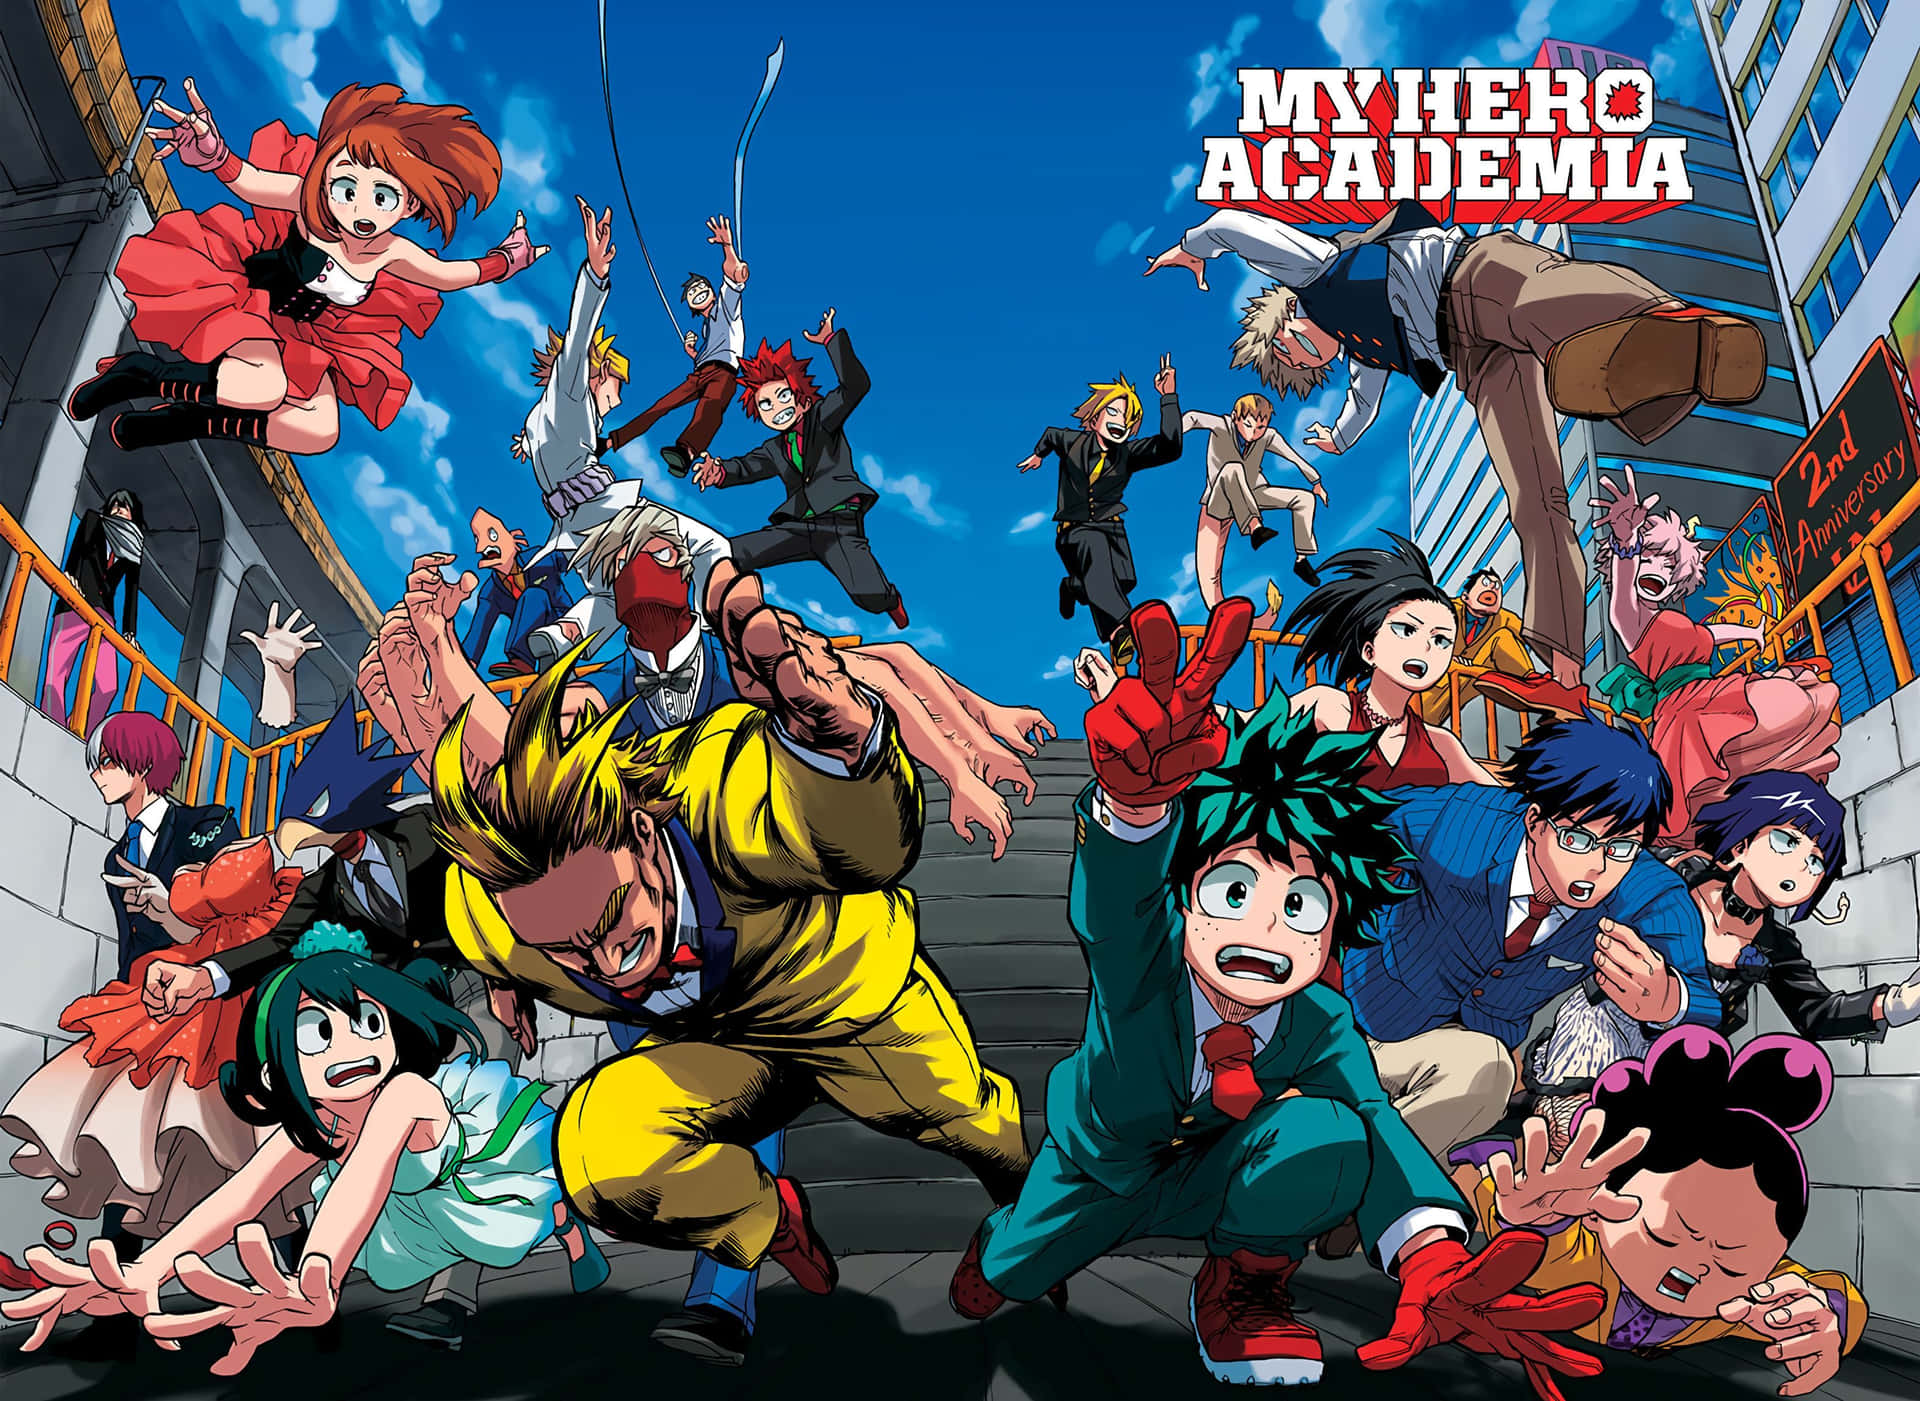 Excitement as the Heroes of My Hero Academia Prepare to Take on Villains